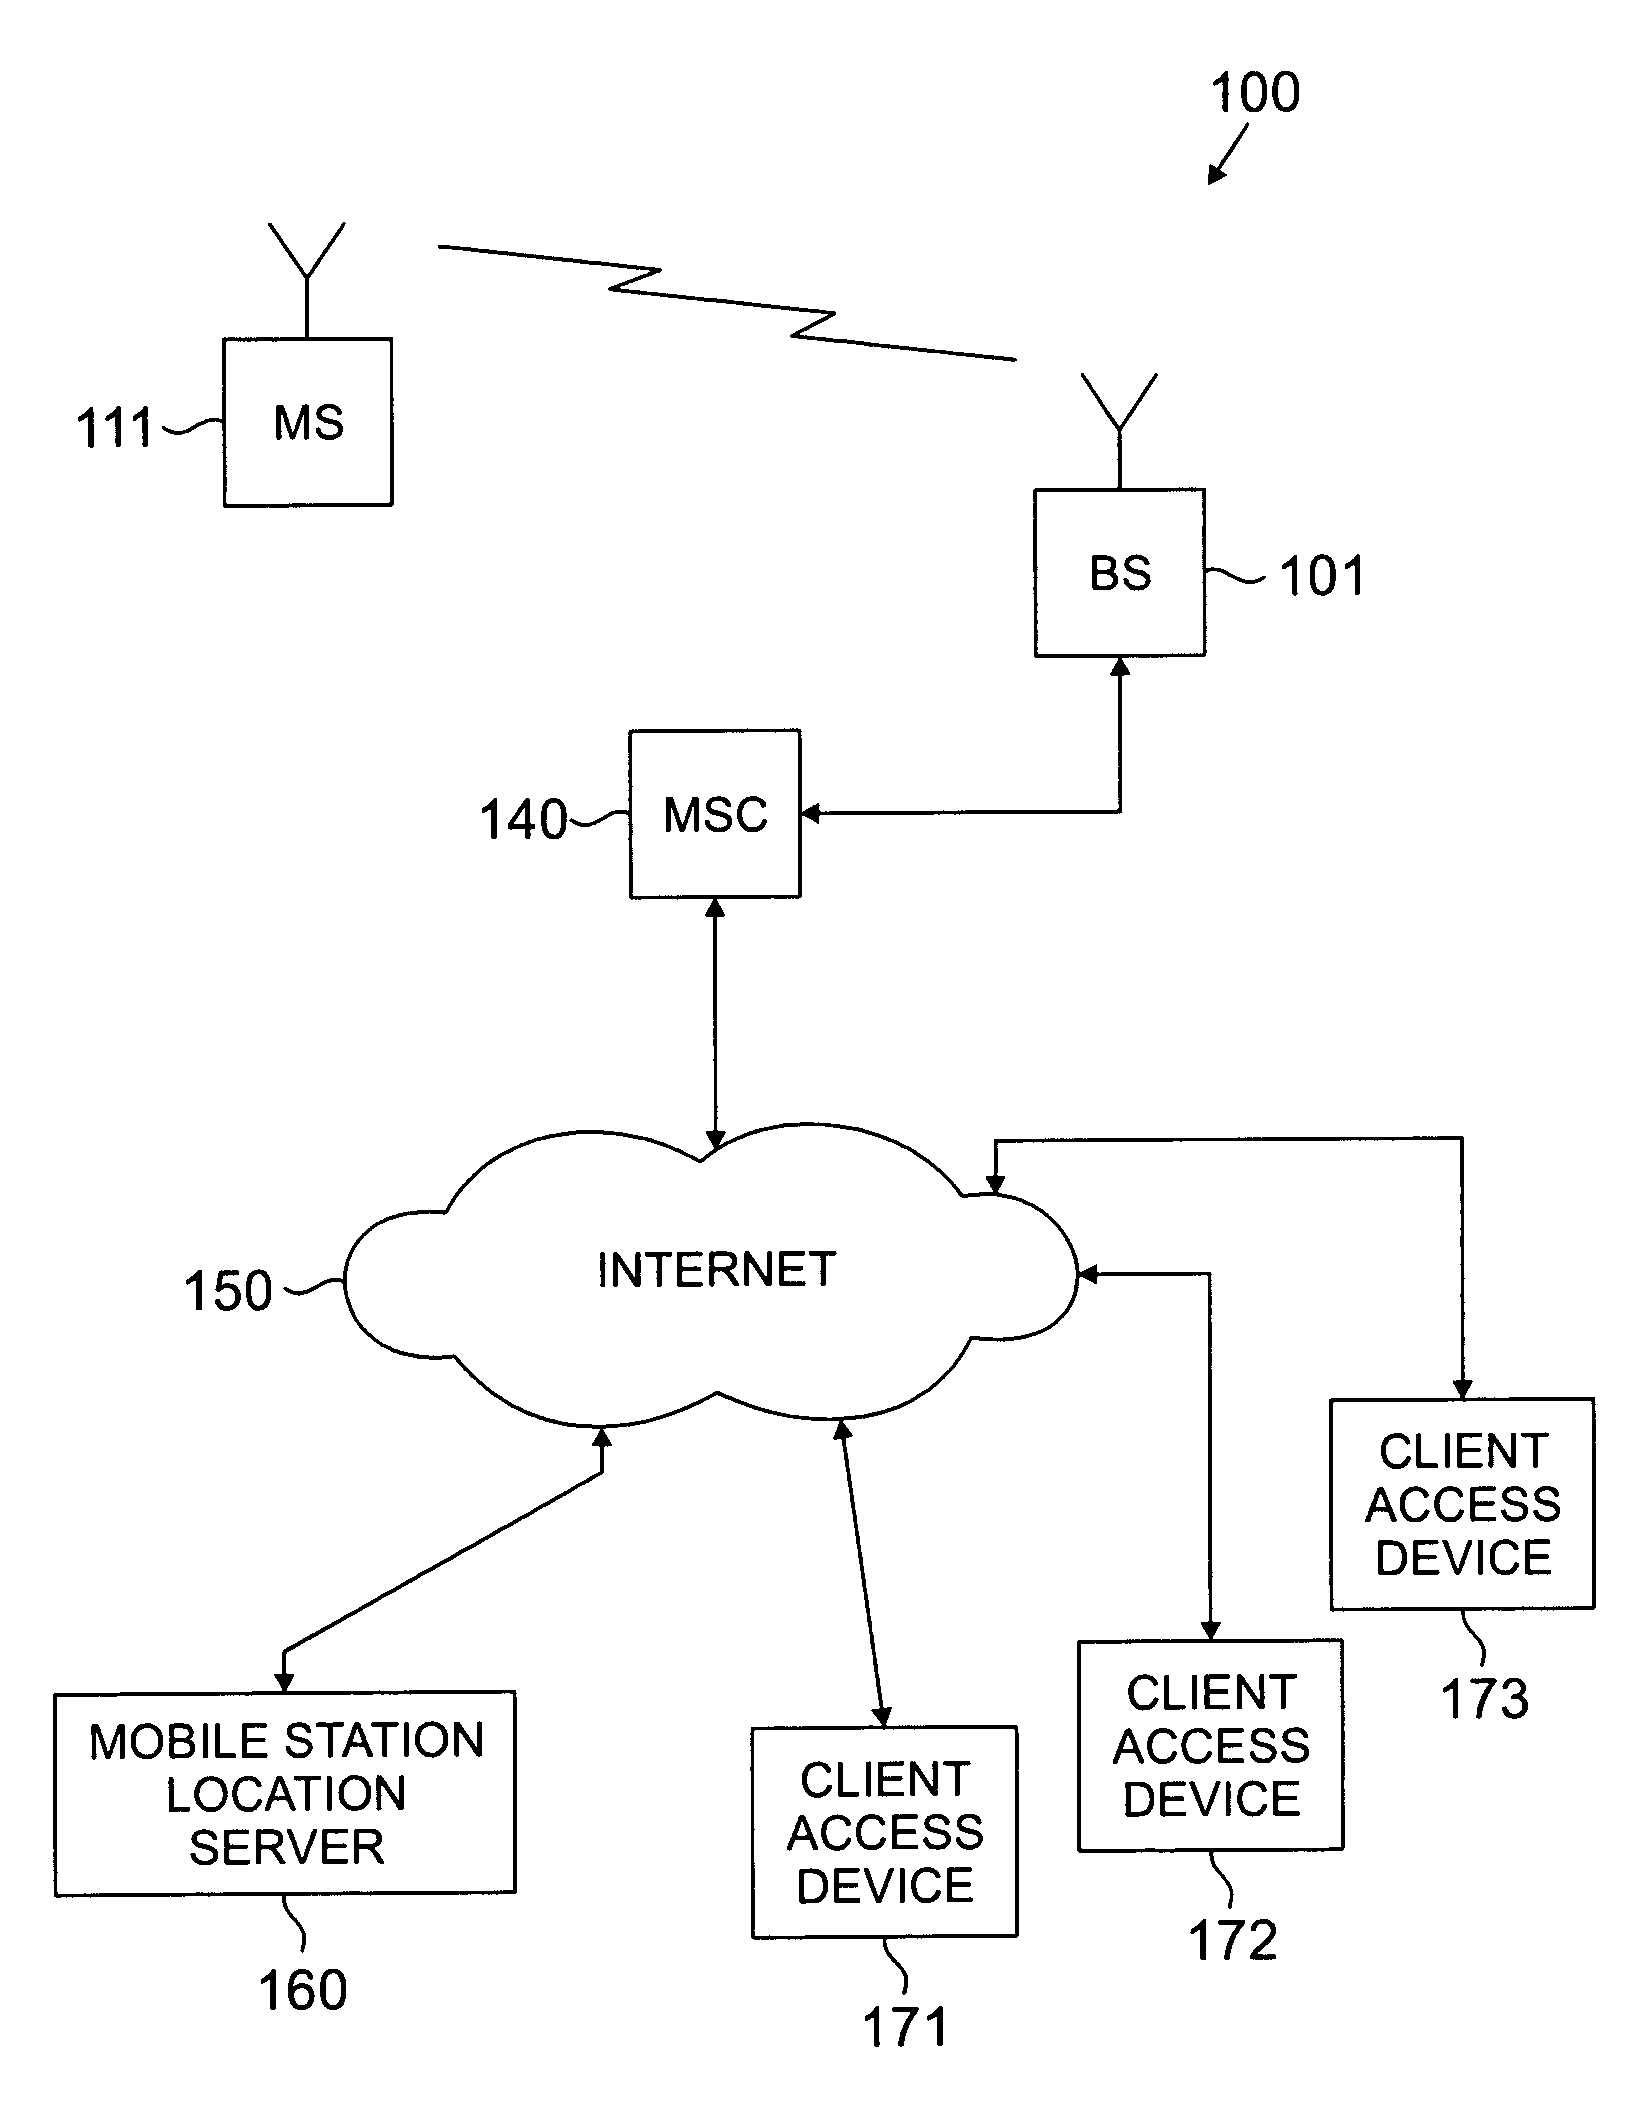 Apparatus and method for secure distribution of mobile station location information